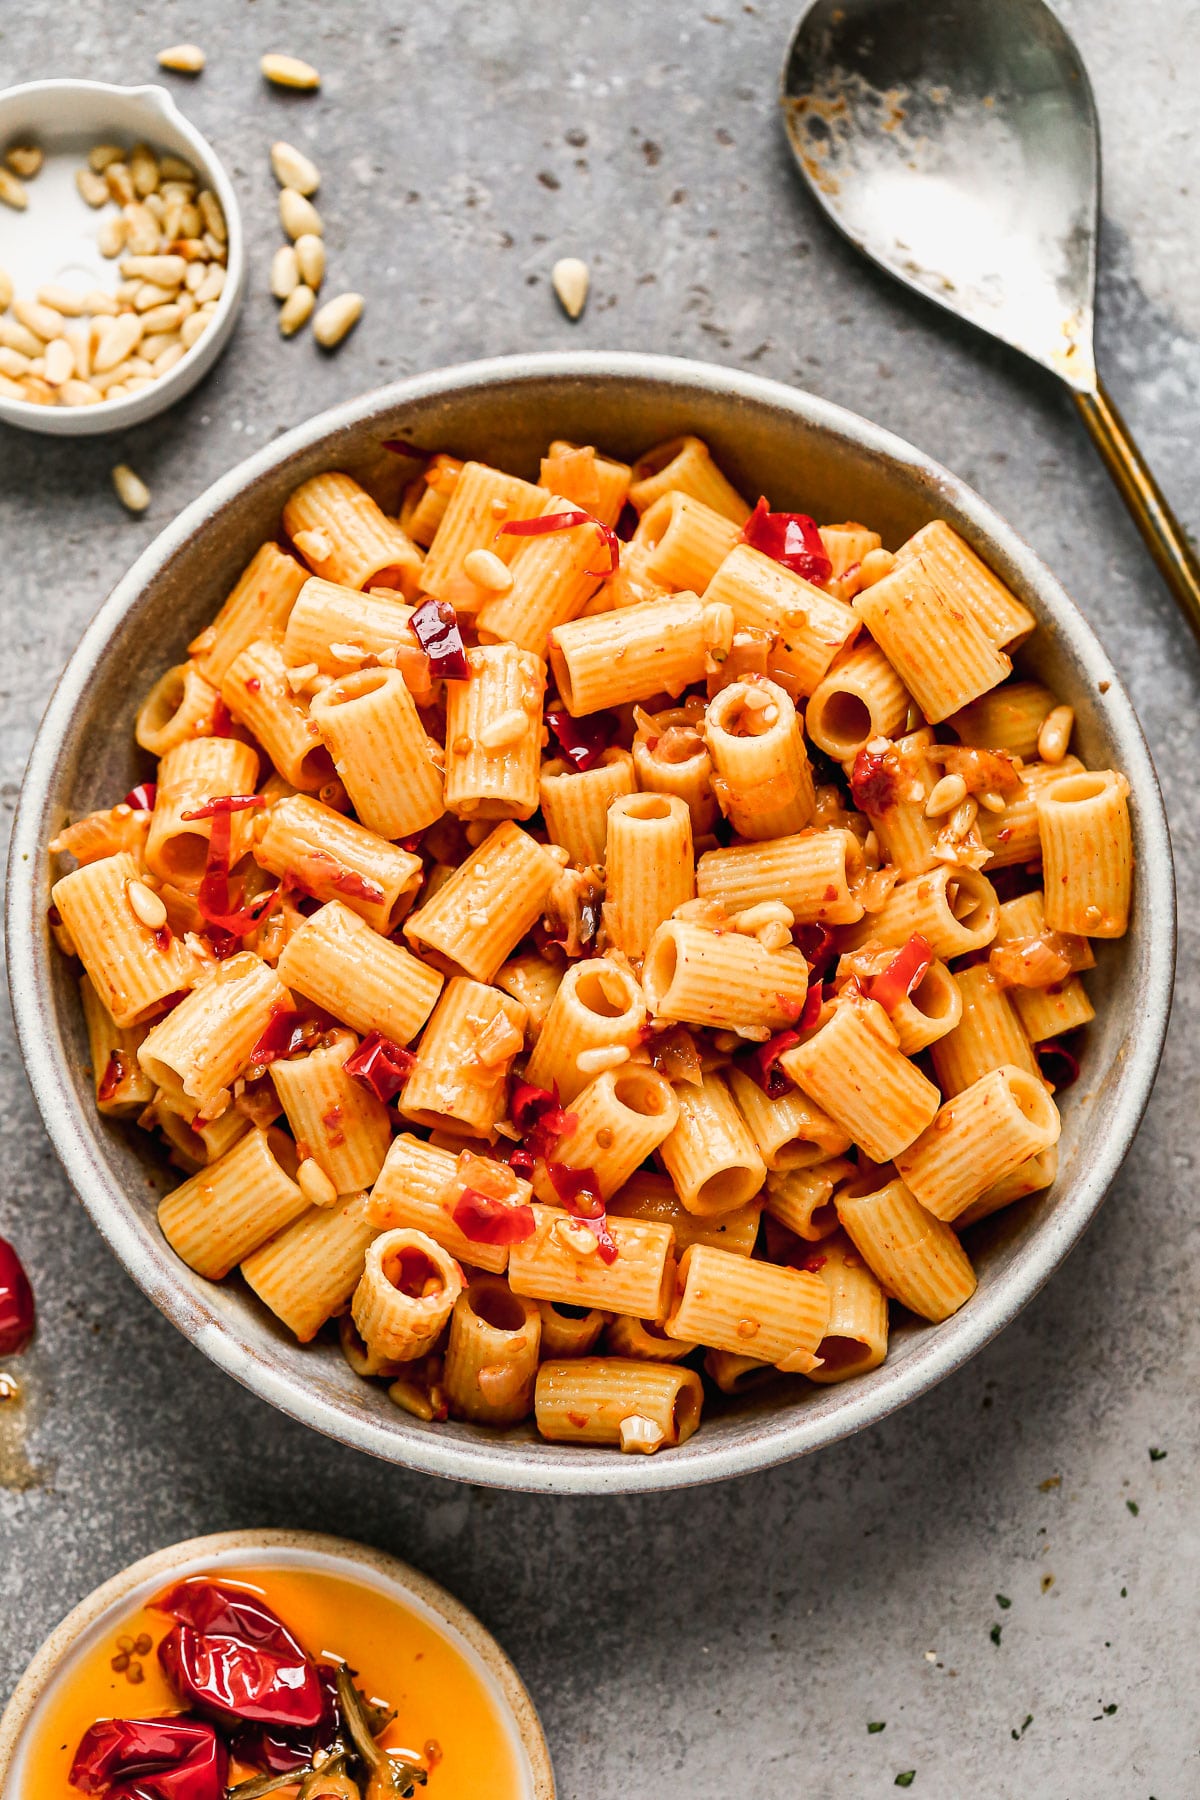 Calabrian Chili Pasta. Fiercely spicy, creamy (without the addition of any cream), cheesy, and peppered with hidden bits of crunch and texture from tiny pine nut treasures.&nbsp;